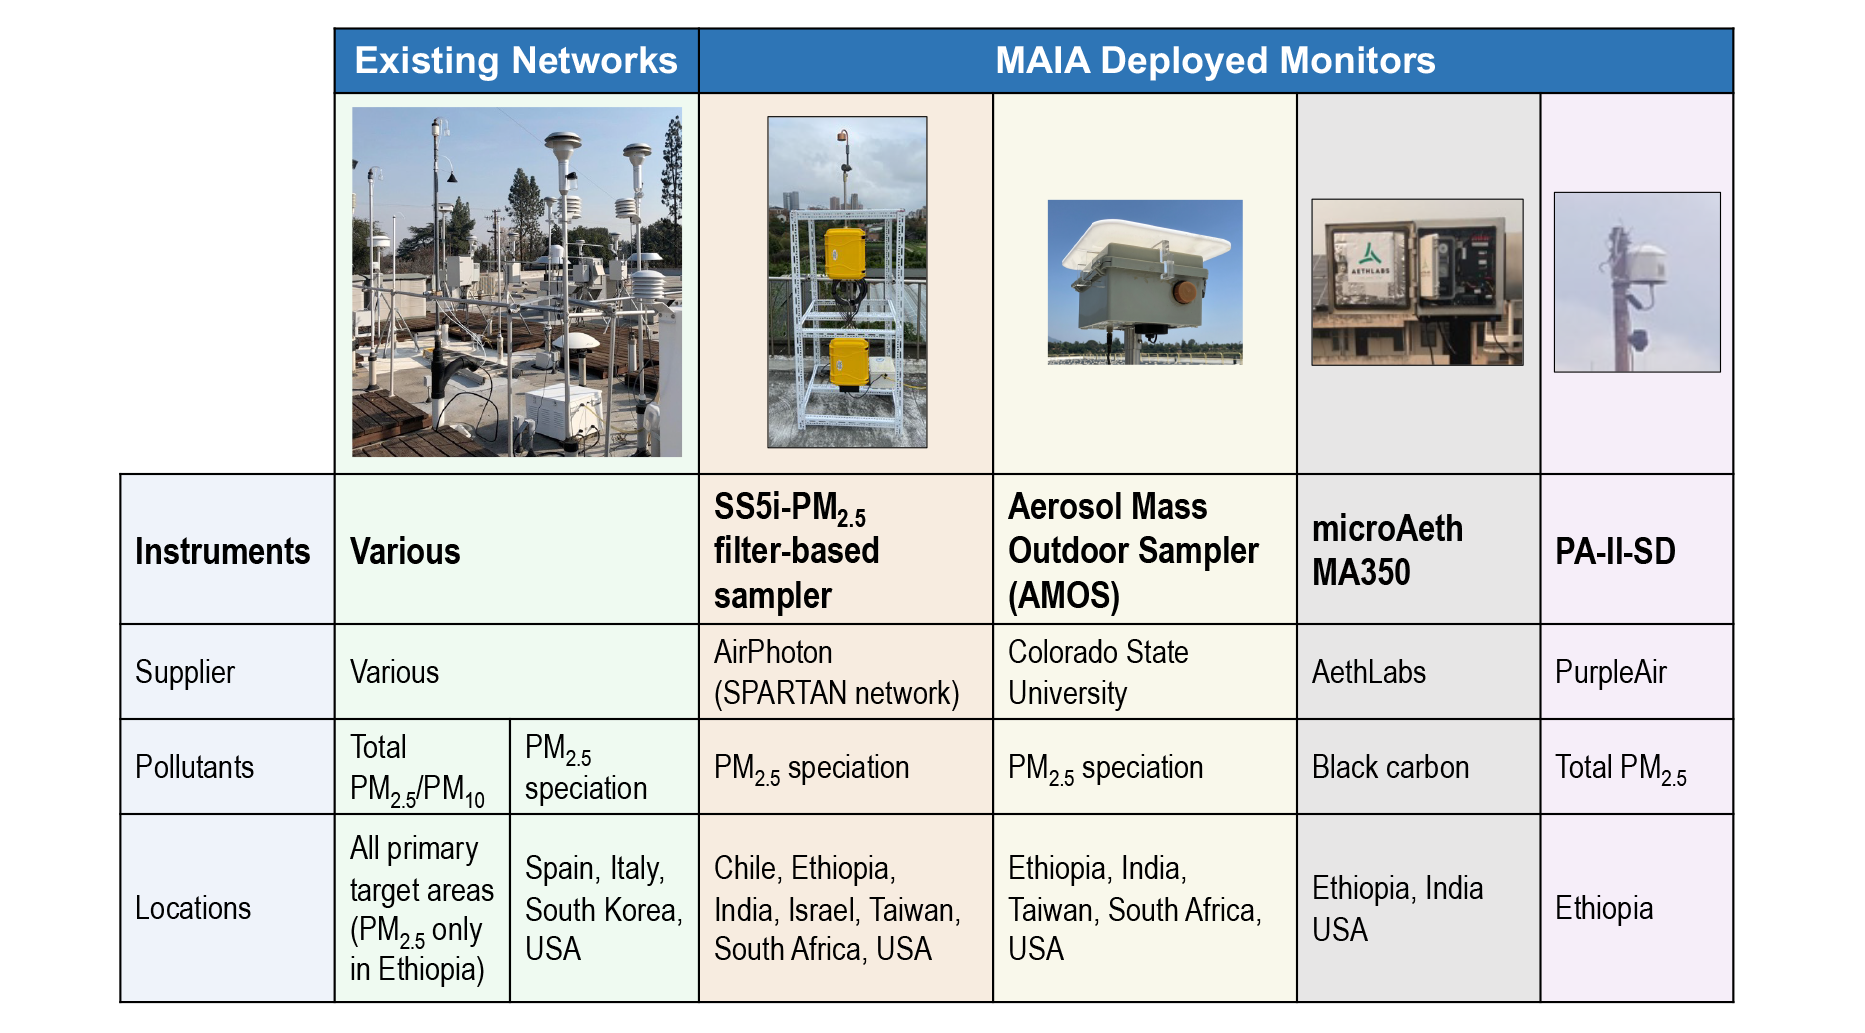 MAIA’s Surface Monitoring Network